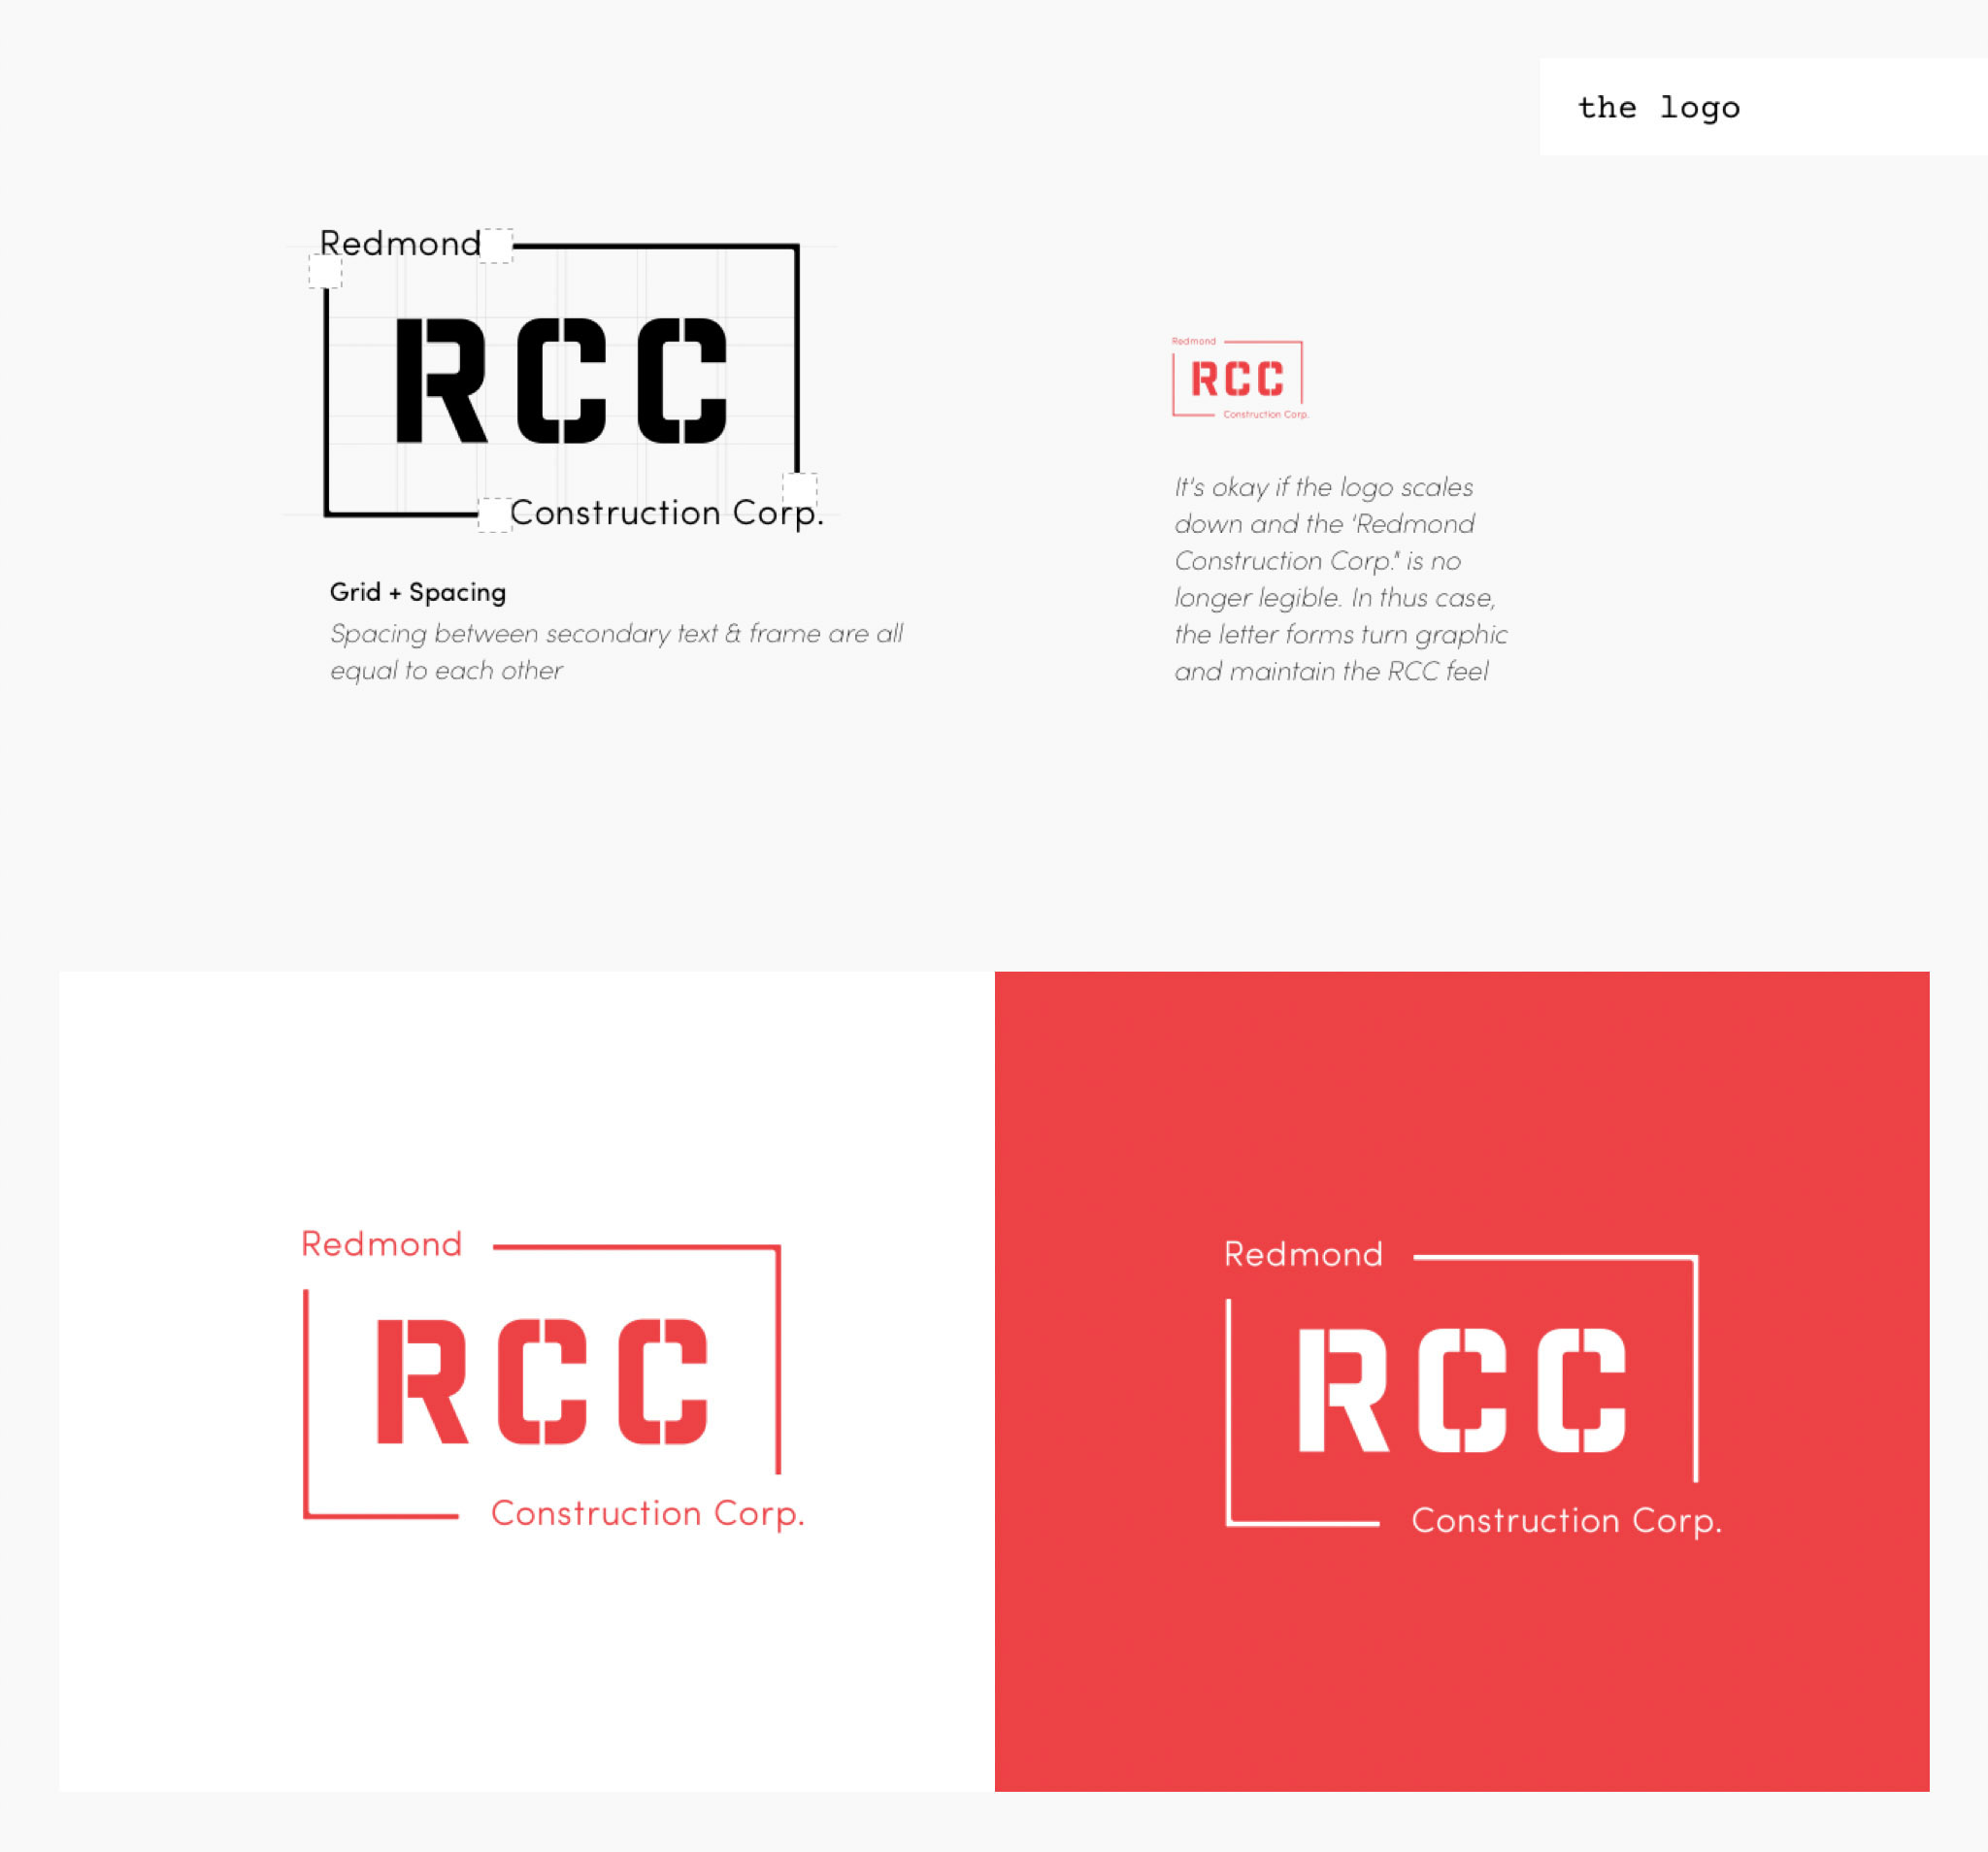 This shows different aspects of the logo. Including colors and grid used to create it. The image also explains that when the logo gets smaller, the text will become illegible, which is fine - because they transform into supporting graphics that maintain the graphical nature of RCC’s brand.